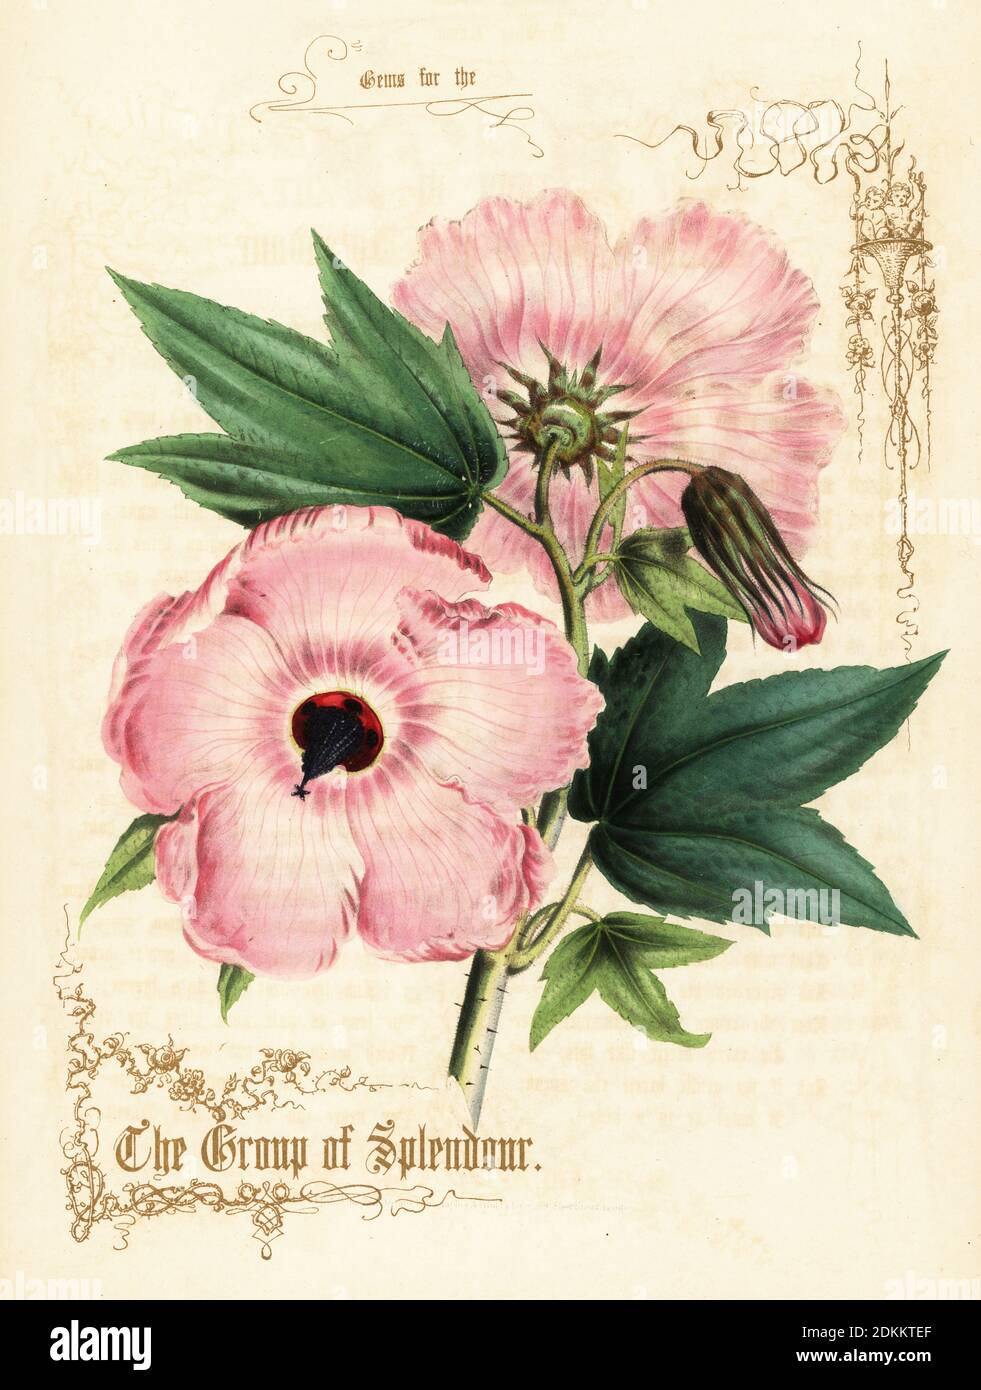 Pink hibiscus flowers and foliage. The Group of Splendour. Hand-coloured lithograph with gold calligraphy by Paul Jerrard from his own Gems for the Drawing Room, Paul Jerrard, 111 Fleet Street, London, 1852. Jerrard was a Victorian lithographer and print colourer active in London. Stock Photo